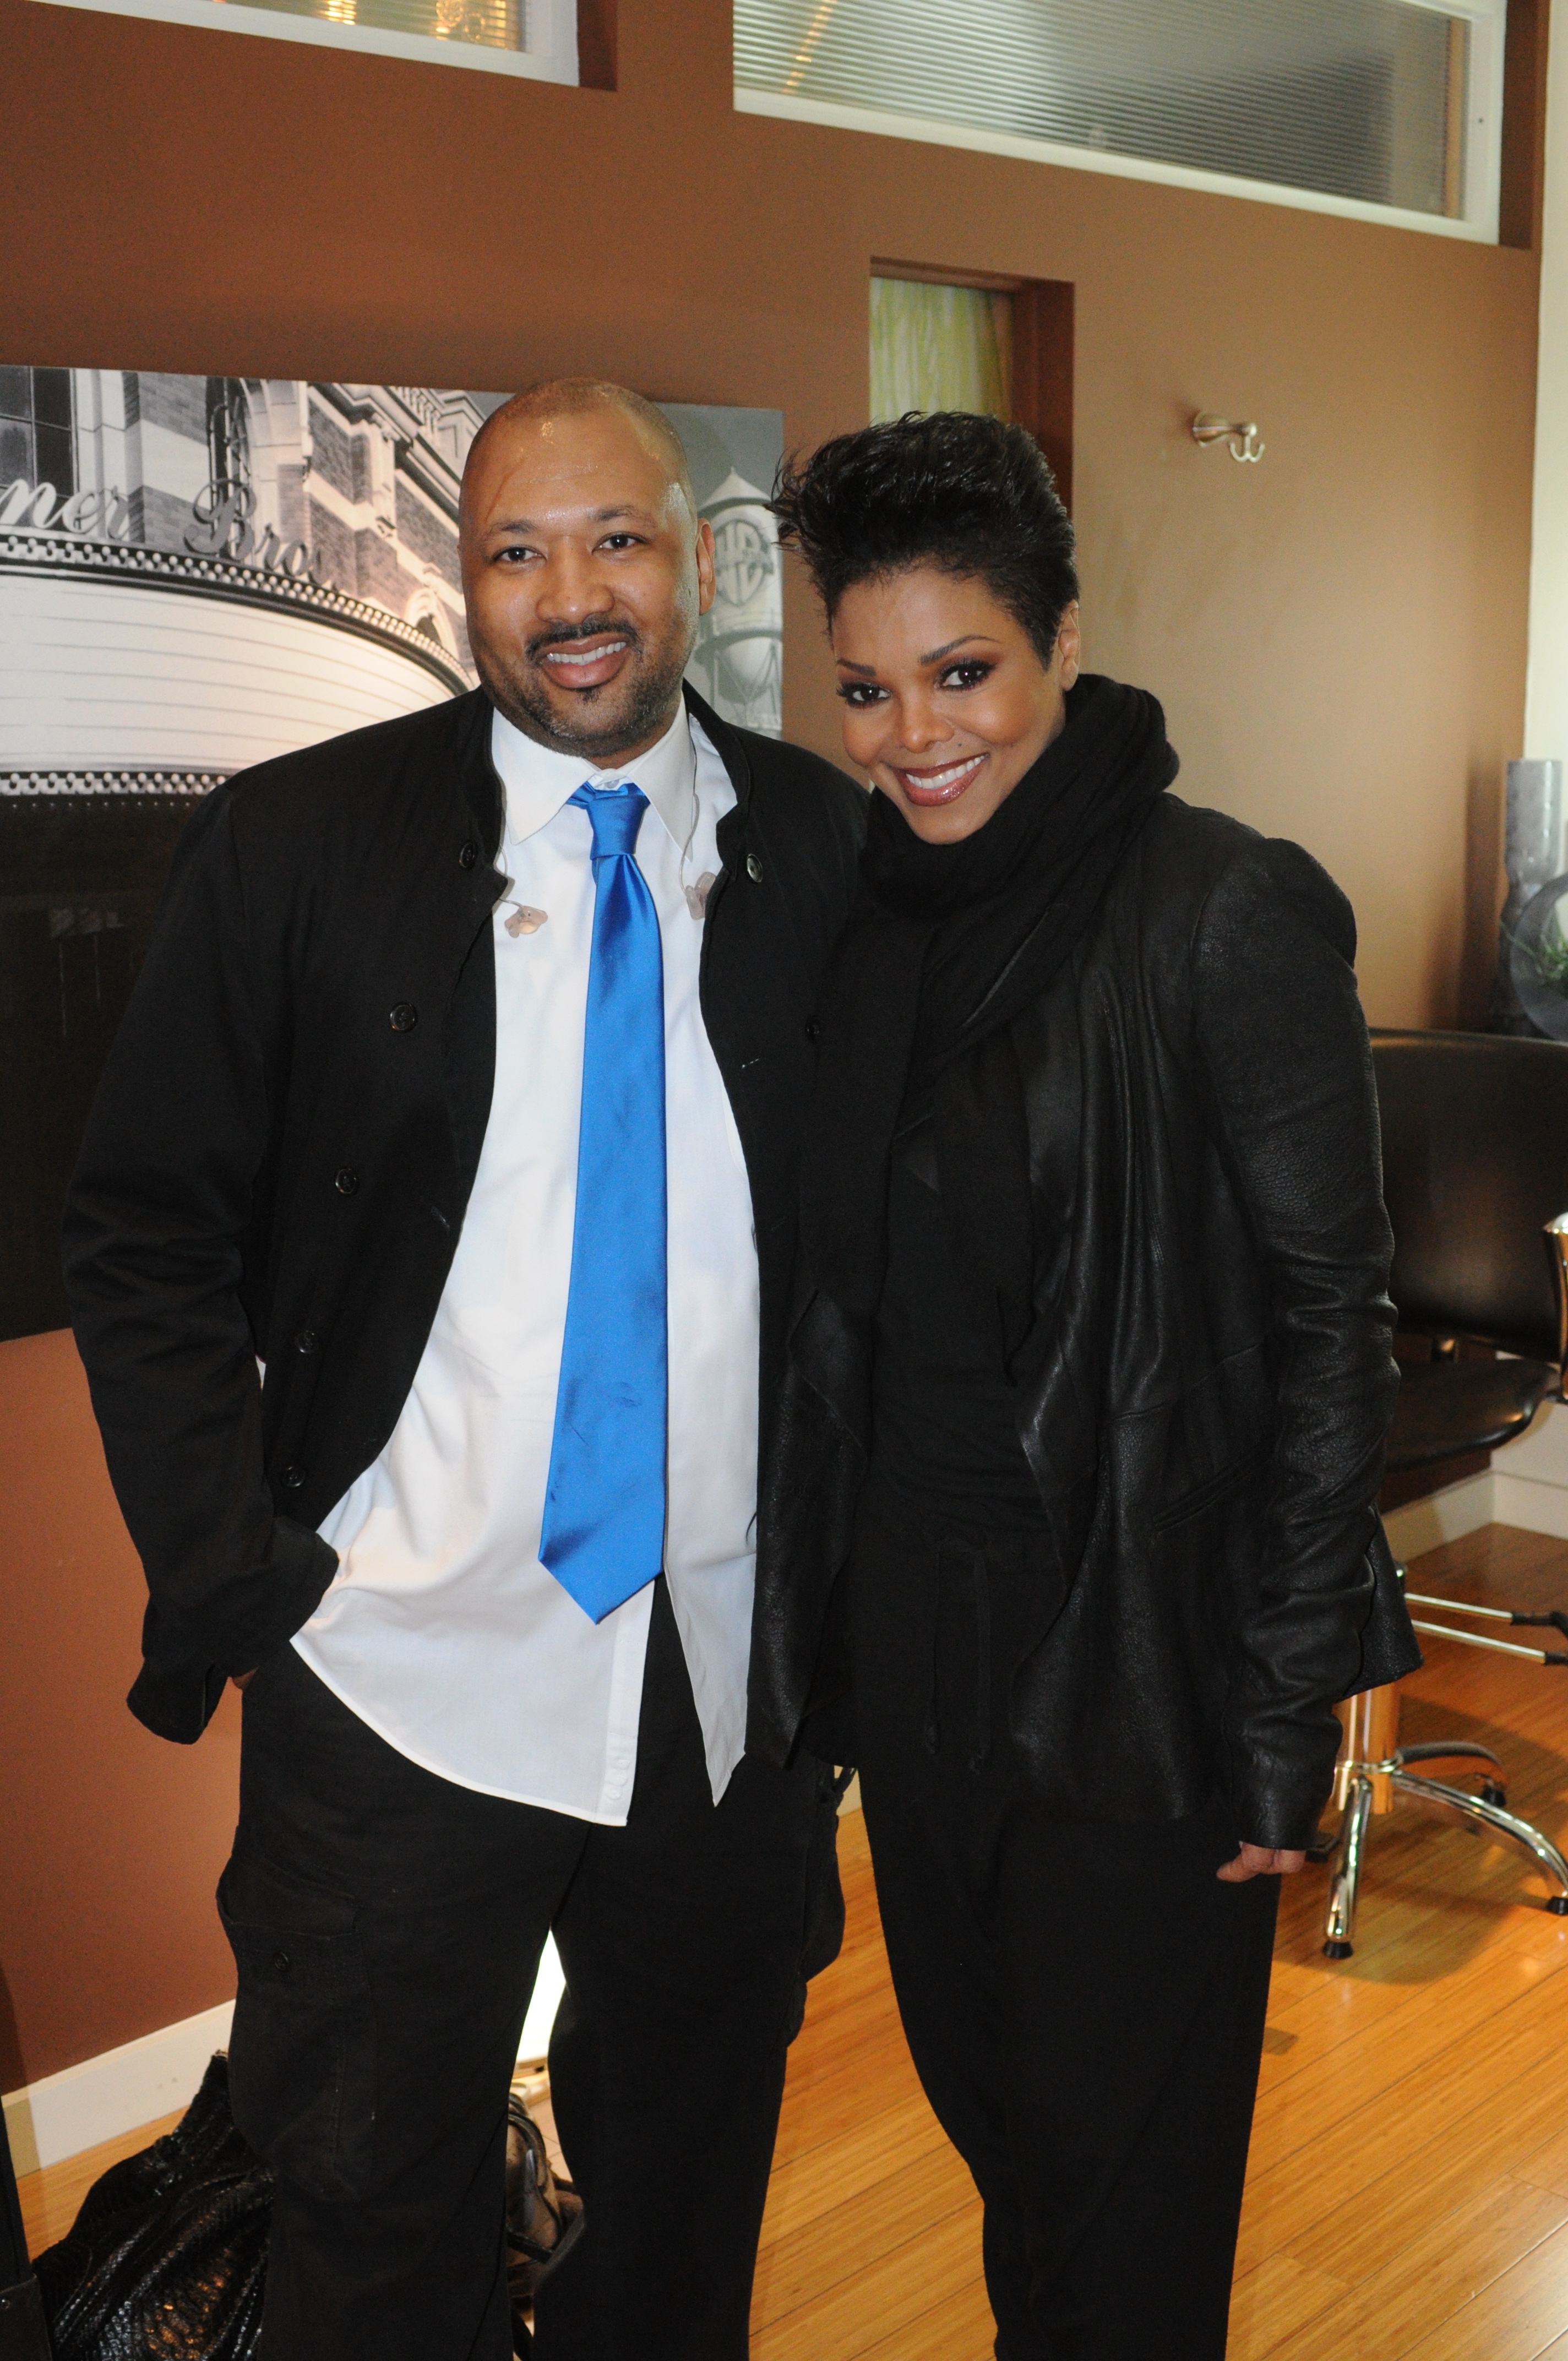 Alex Al with the legendary Janet Jackson. Alex played bass on Janet's hit song, ' Son of A Gun', on Janet's multi-platinum album, All for You.